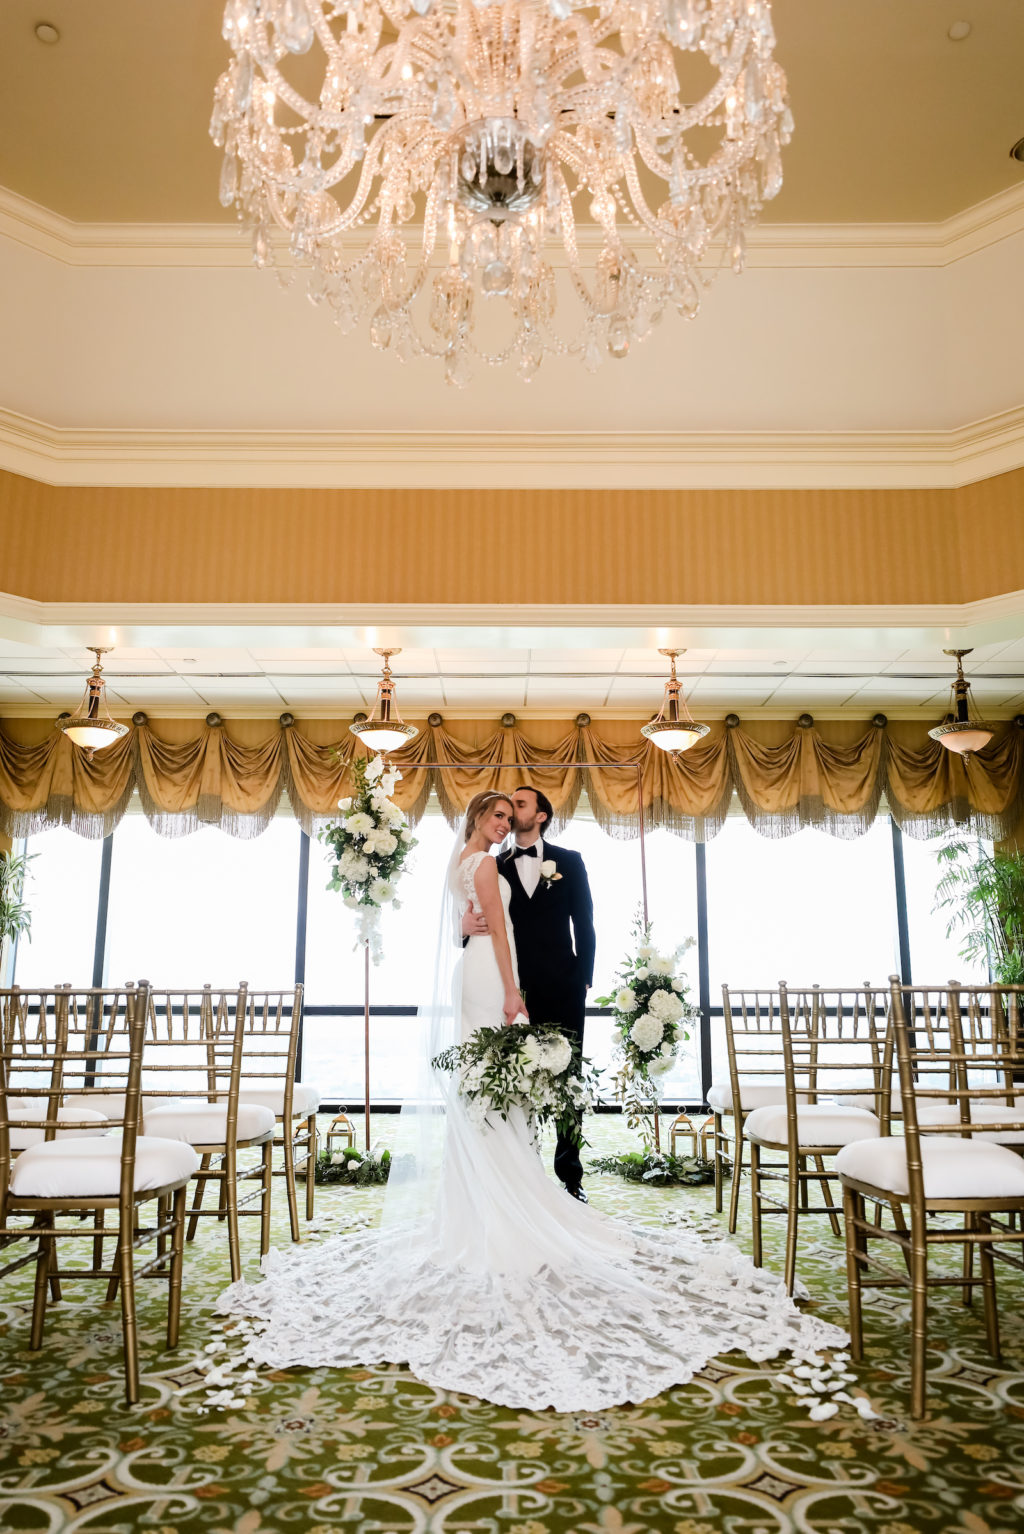 Classic Bride and Groom Exchanging Wedding Vows During Ceremony, Rectangular Arch with White and Greenery Lush Floral Arrangements, Gold Chiavari Chairs | Tampa Bay Wedding Planner Elegant Affairs by Design | Wedding Venue The Tampa Club | Wedding Photographer Lifelong Photography Studio | Wedding Rentals Outside the Box Event Rentals | Wedding Dress and Tuxedo Truly Forever Bridal | Styled Shoot